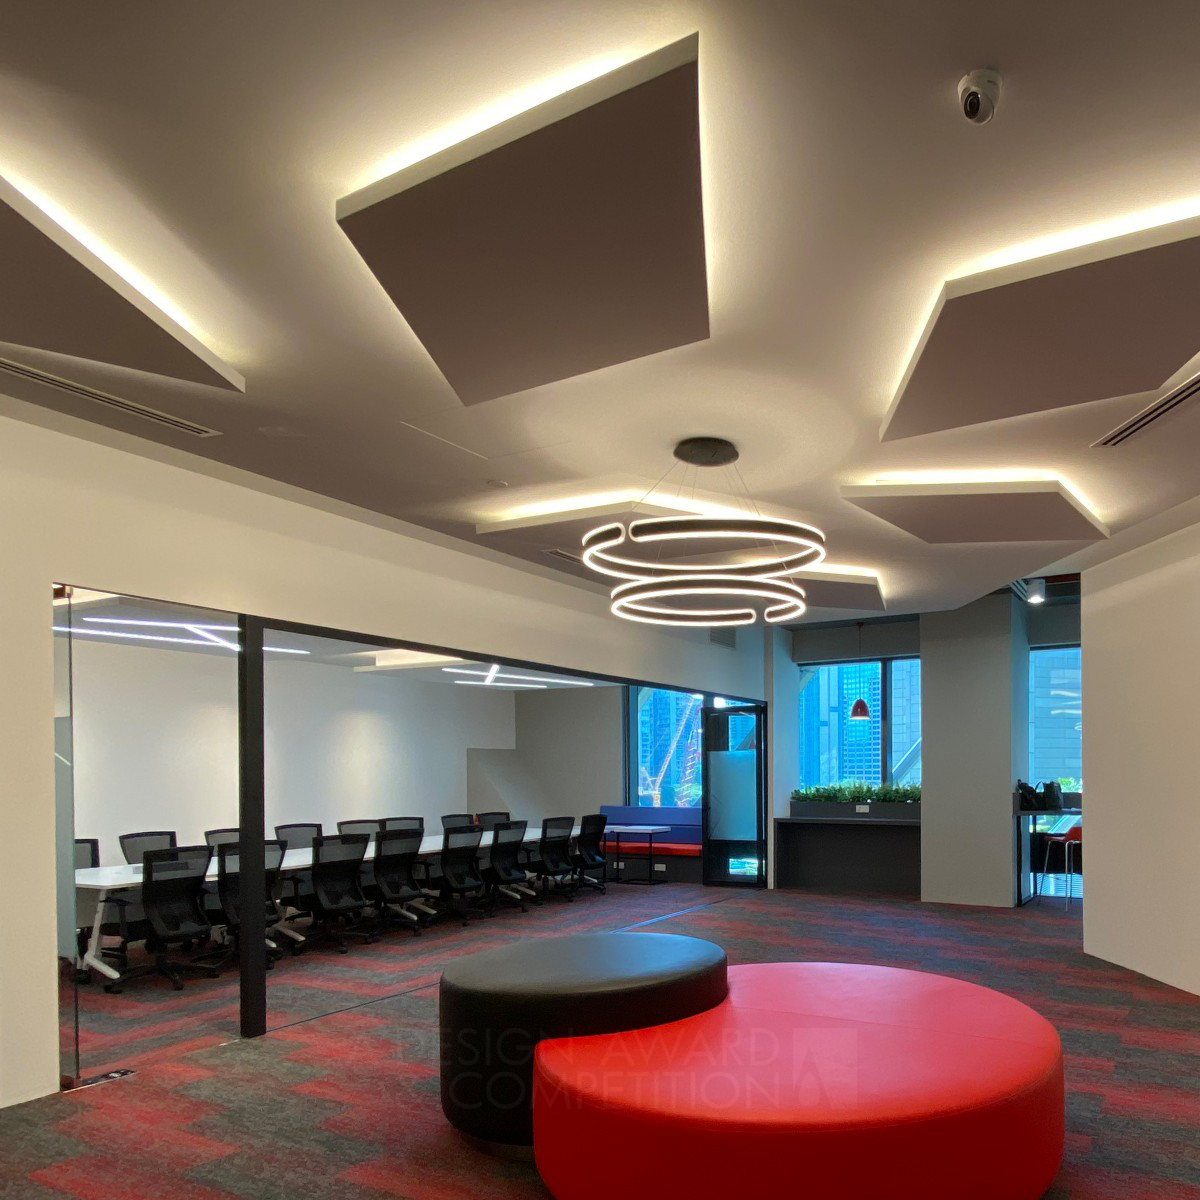 Sabre Travel Network <b>Corporate Office